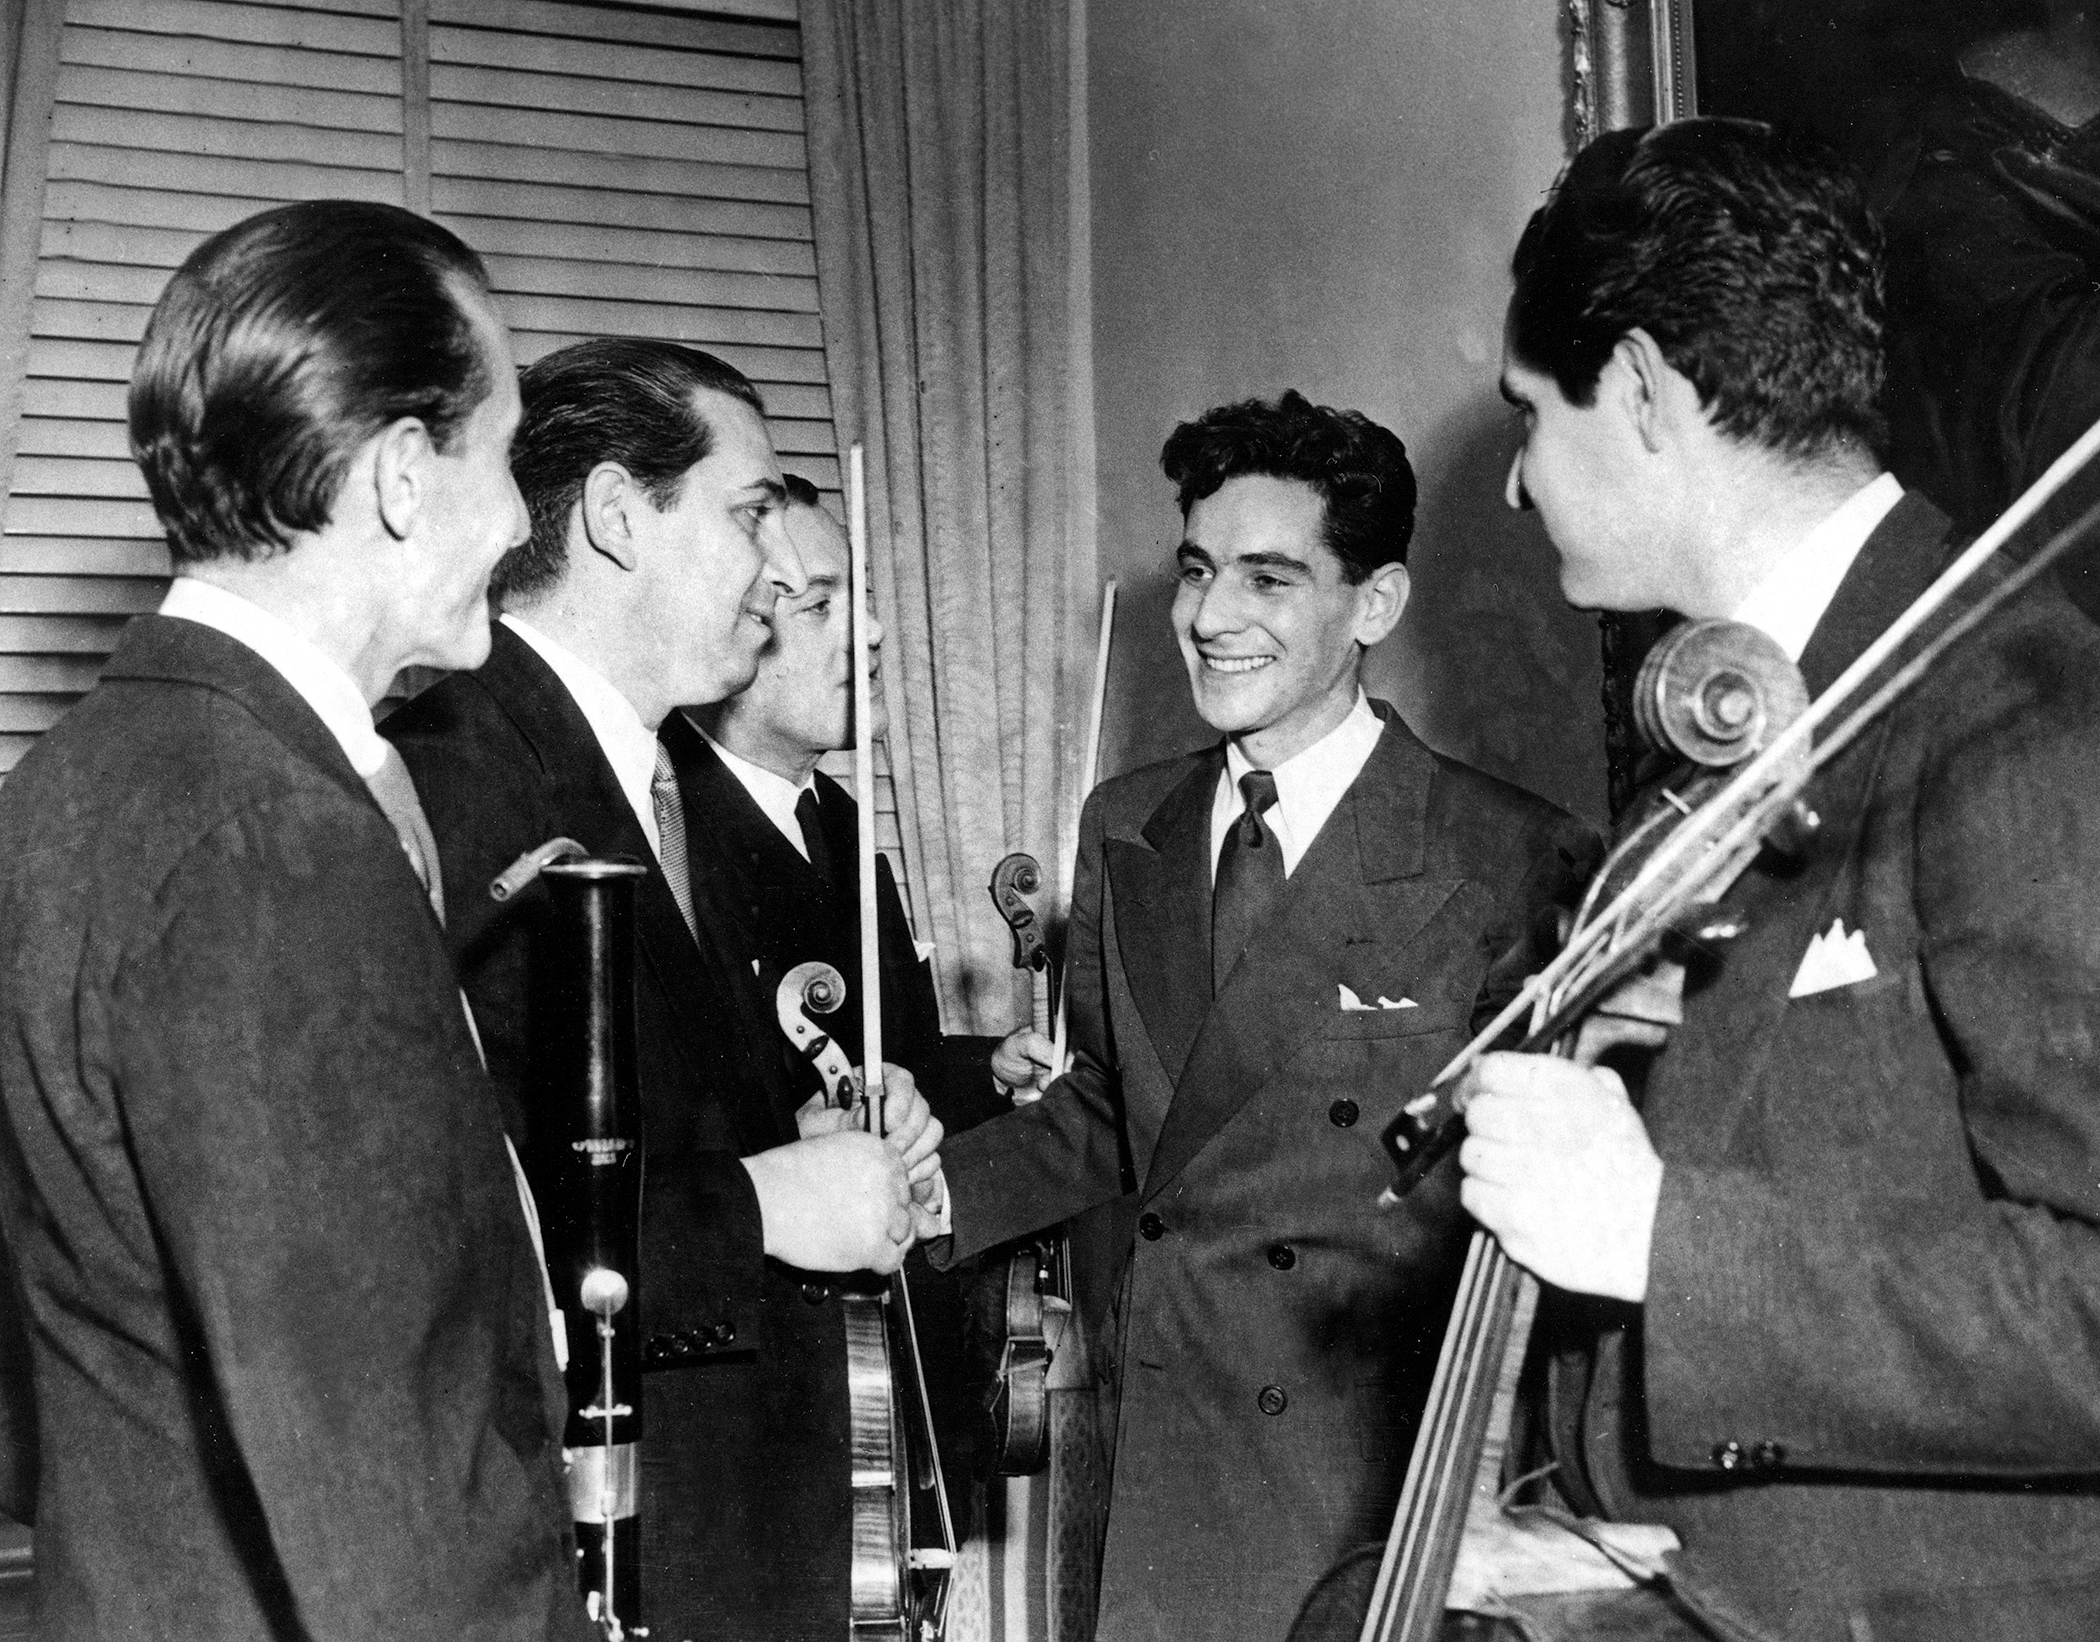 Leonard Bernstein, second from right, Assistant Conductor of the New York Philharmonic-Symphony Orchestra, is congratulated by members of the orchestra after the 25-year-old musician made his debut at Carnegie Hall in New York, Nov. 14, 1943. Bernstein substituted for Bruno Walter, who had become ill, to lead the organization in a 90-minute national radio broadcast.